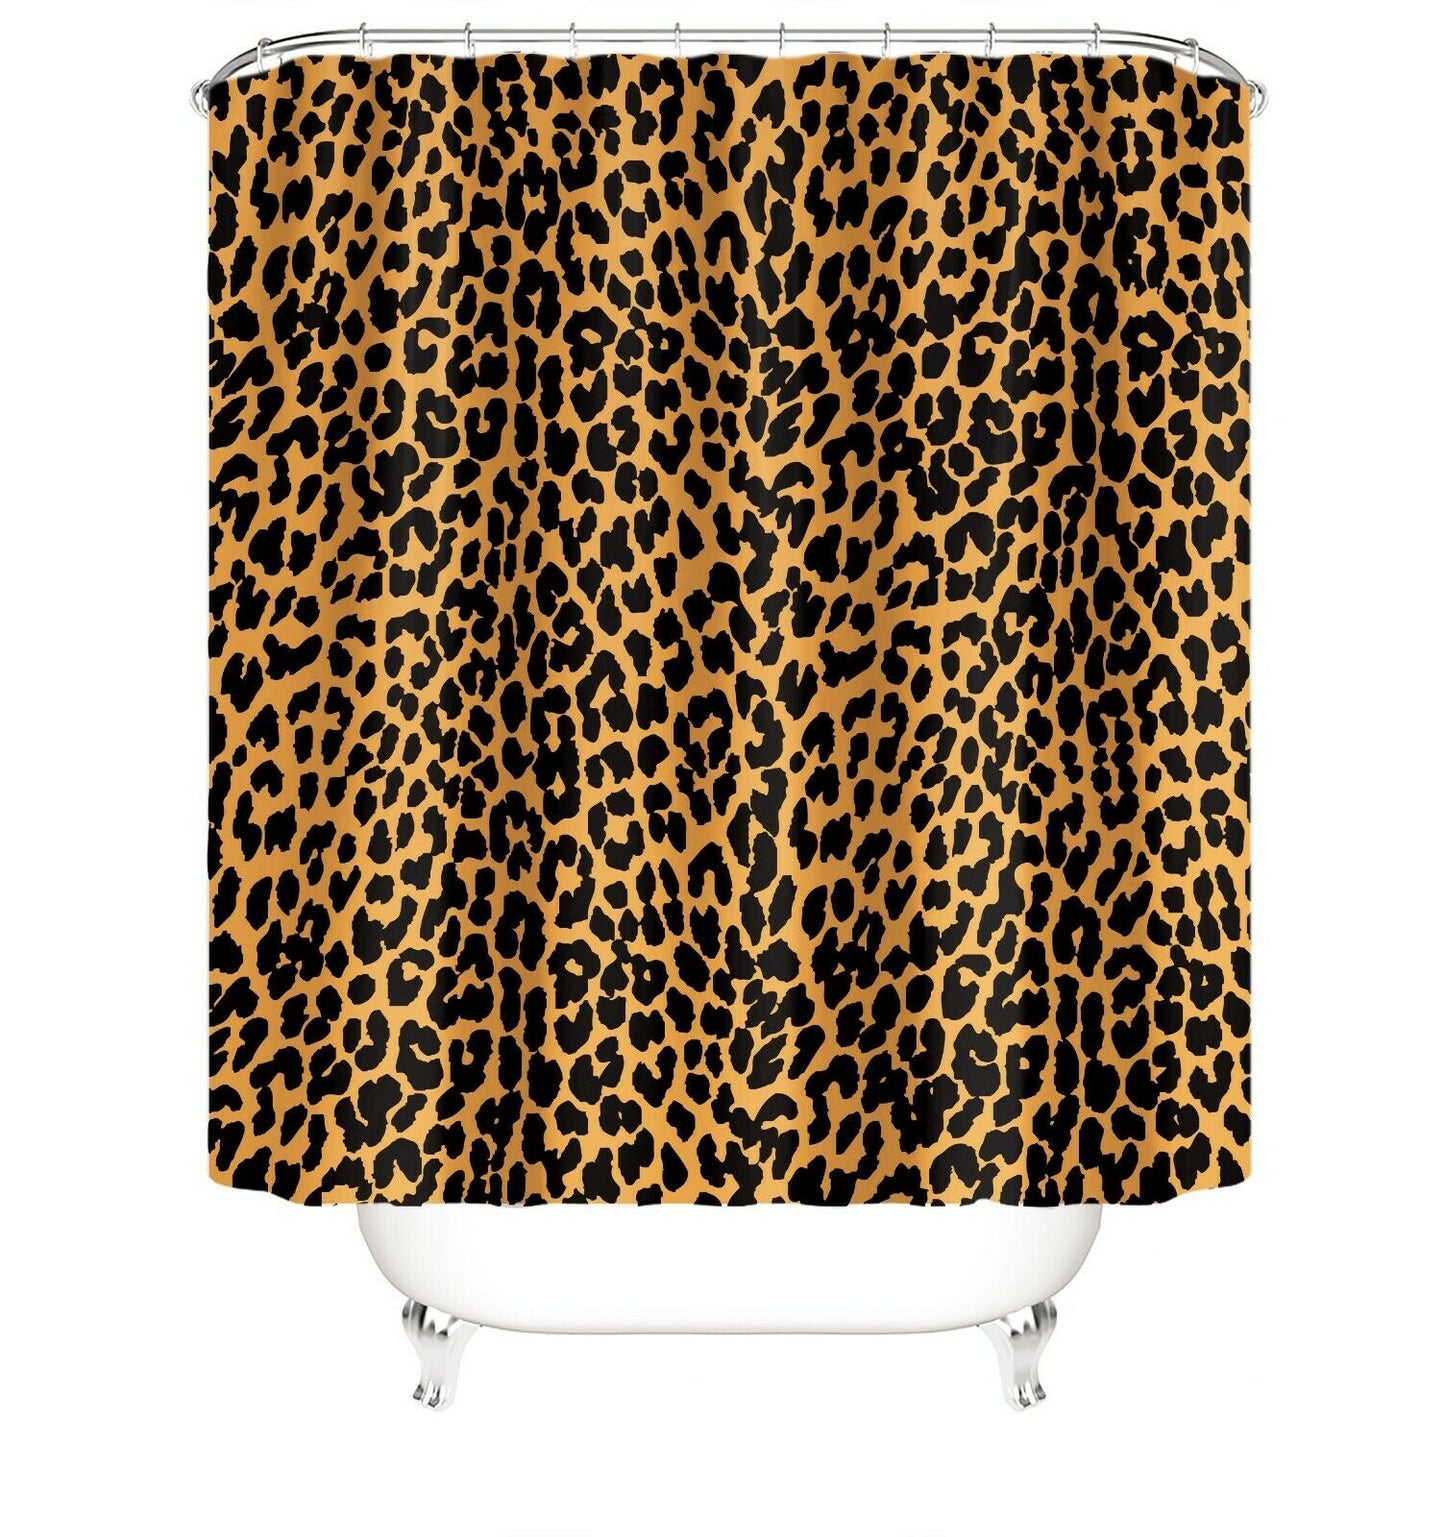 Leopard Fabric Shower Curtain-STYLEGOING